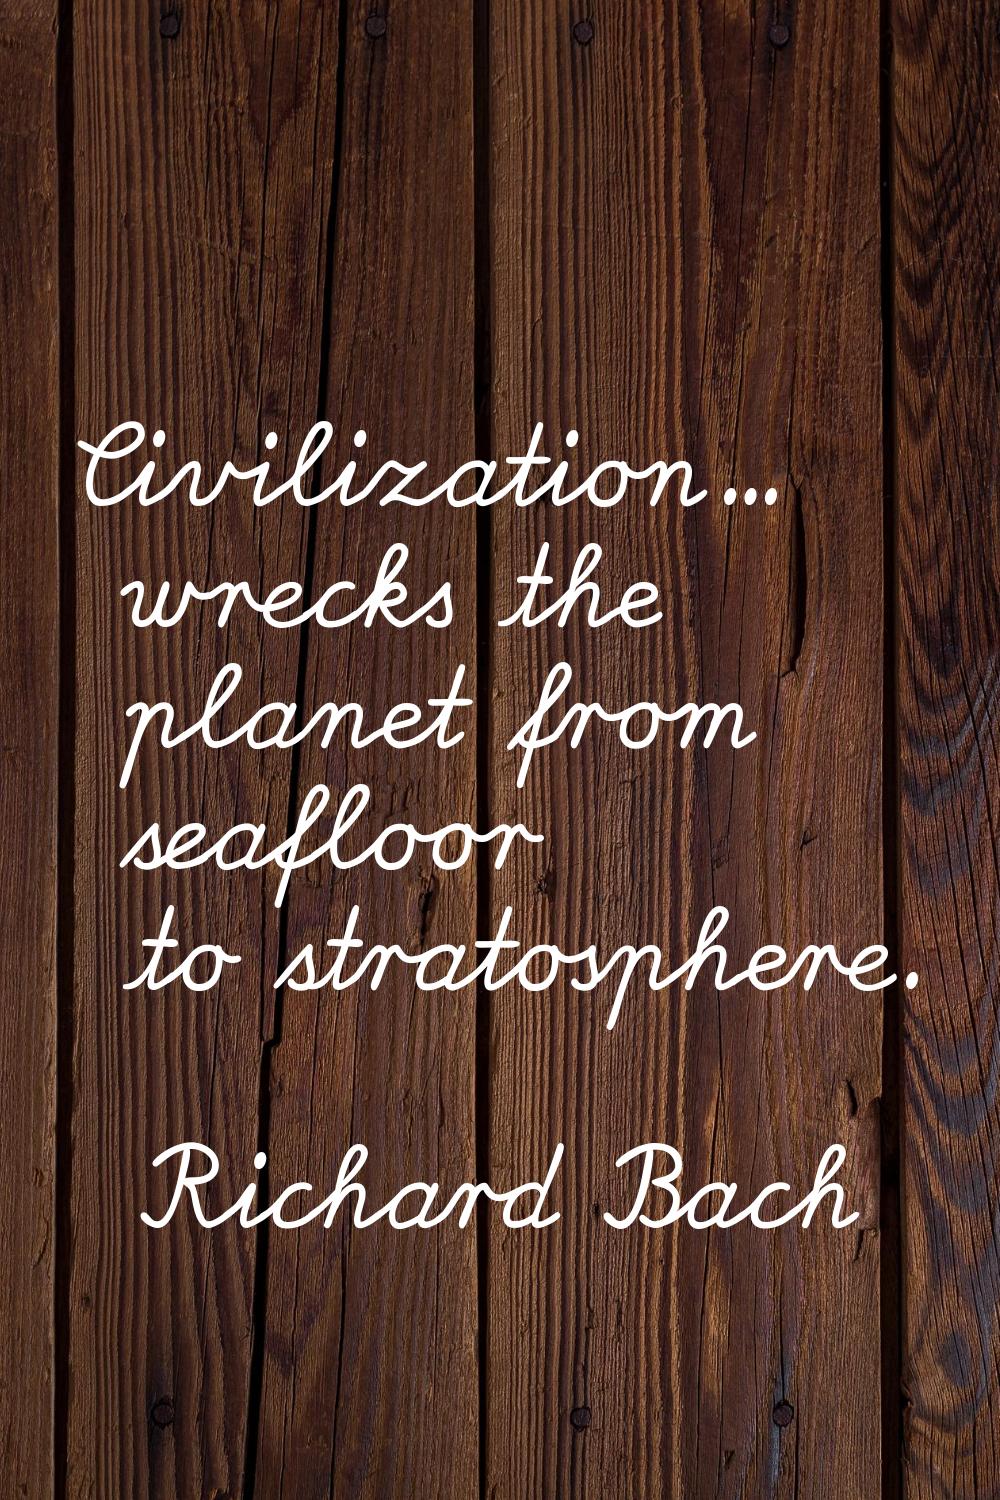 Civilization... wrecks the planet from seafloor to stratosphere.